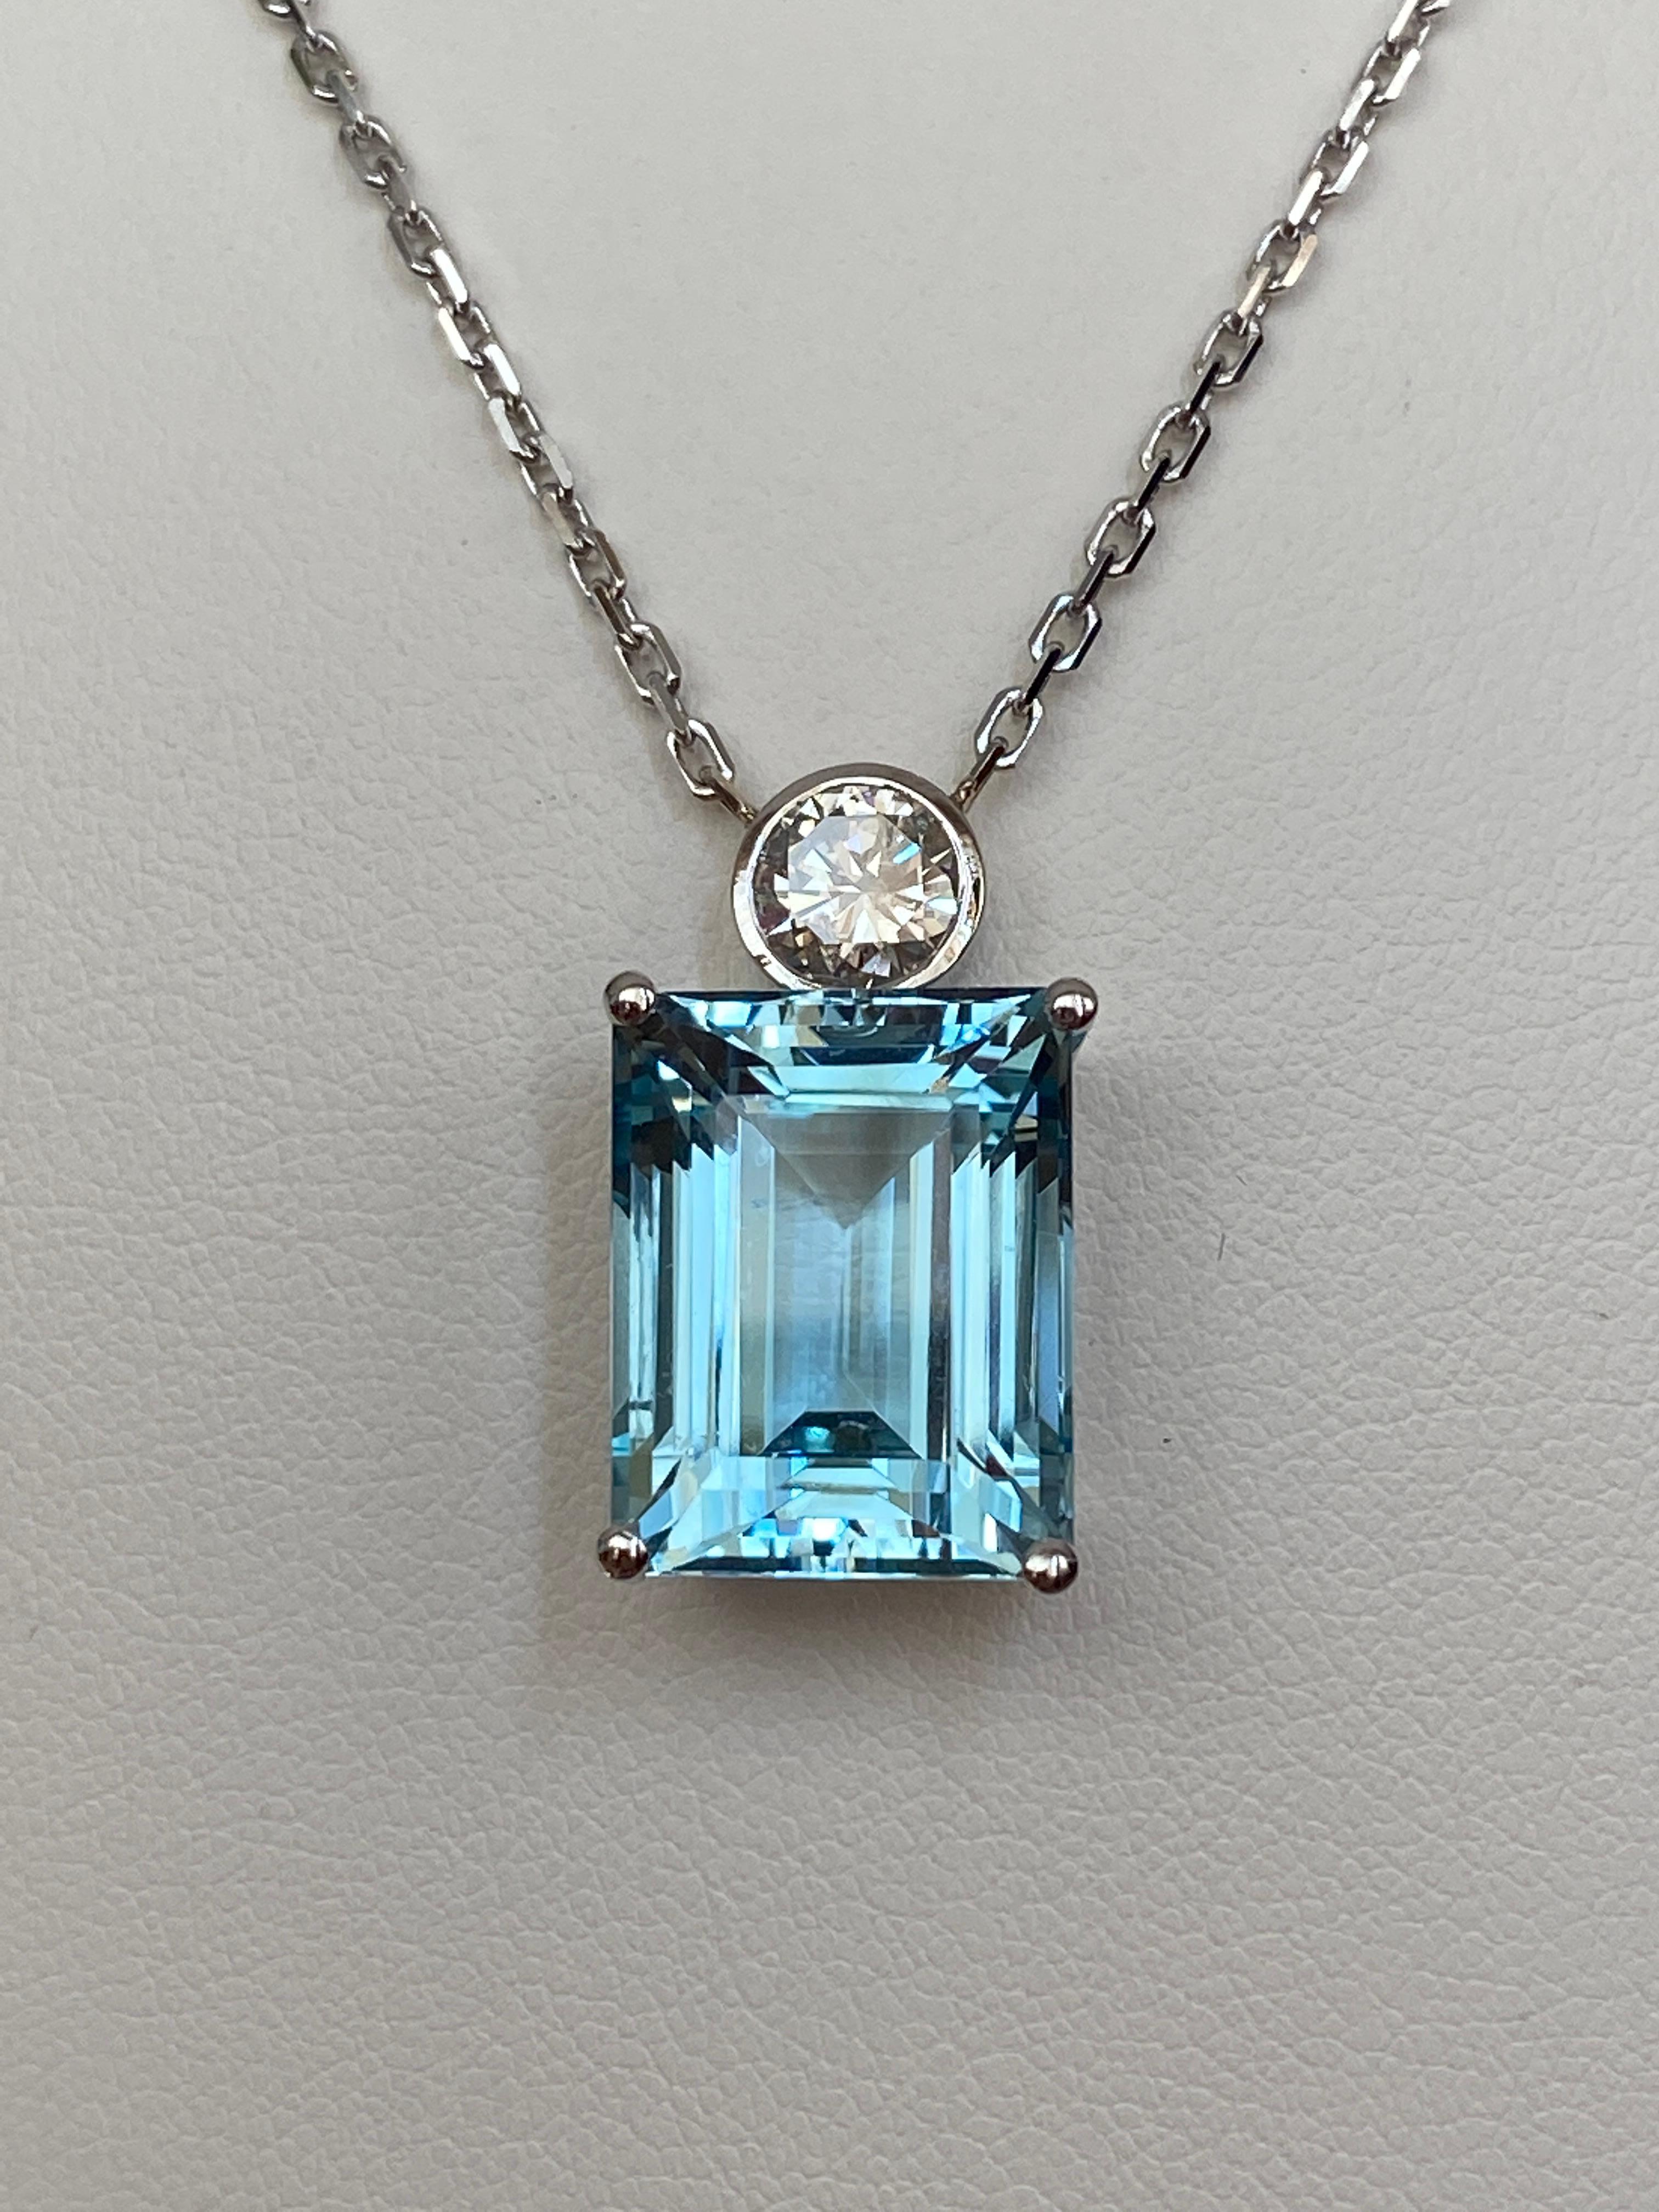 Women's or Men's 18 Karat White Gold Necklace with a Diamond Pendant Decorated with Aquamarine  For Sale